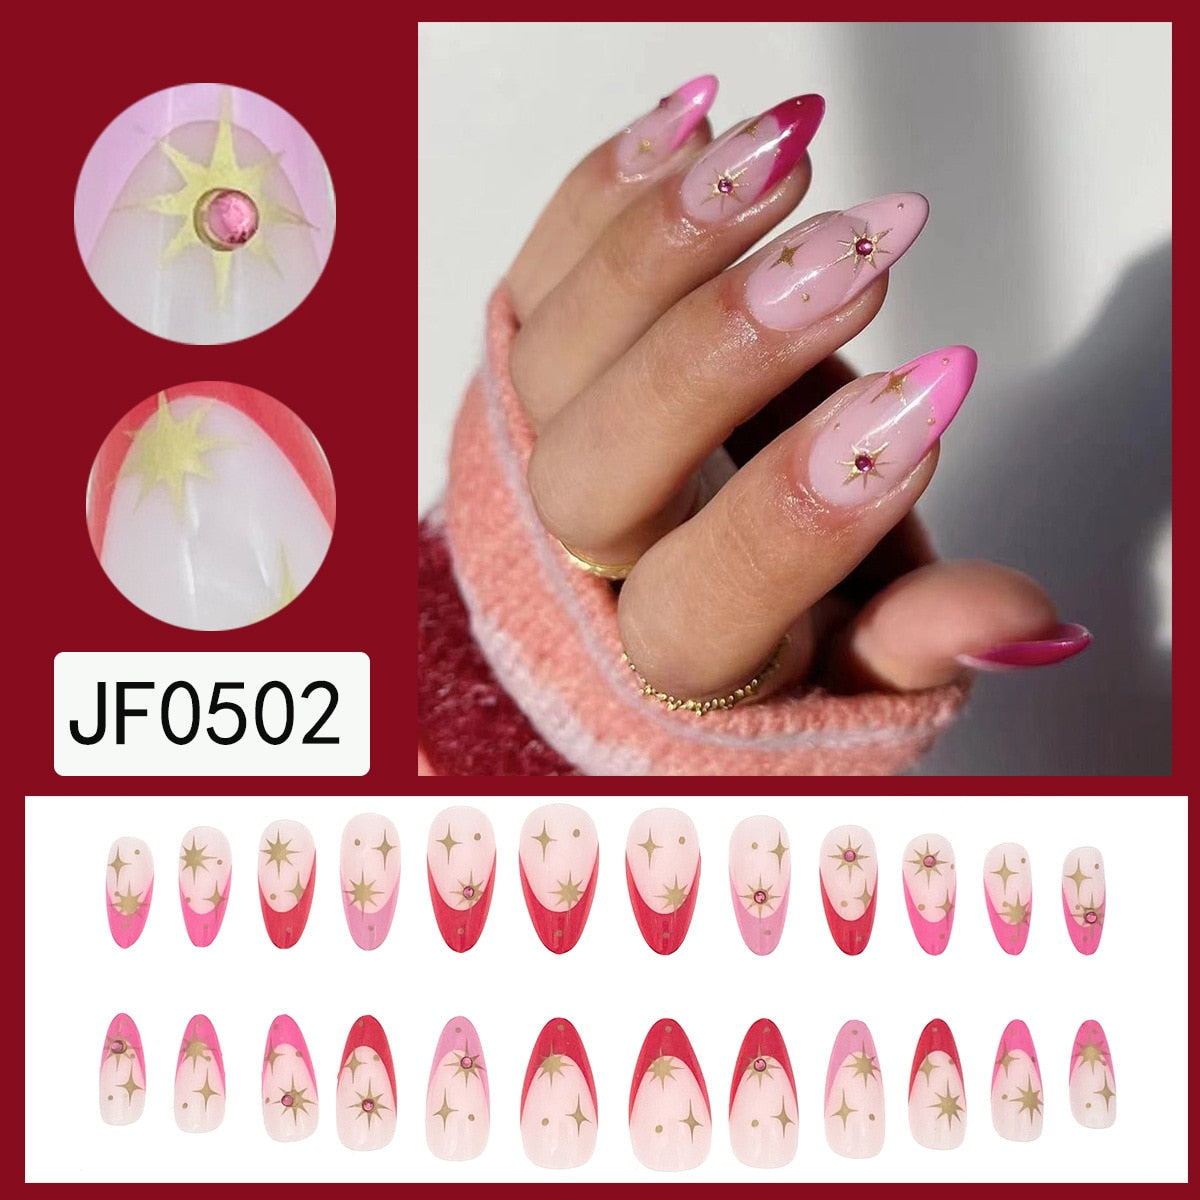 Flytonn 24pcs y2k Nails Set Press On Nail Tips Wearable False Nails With Golden Star Designs Diamonds Colorful French Almond Fake Nails